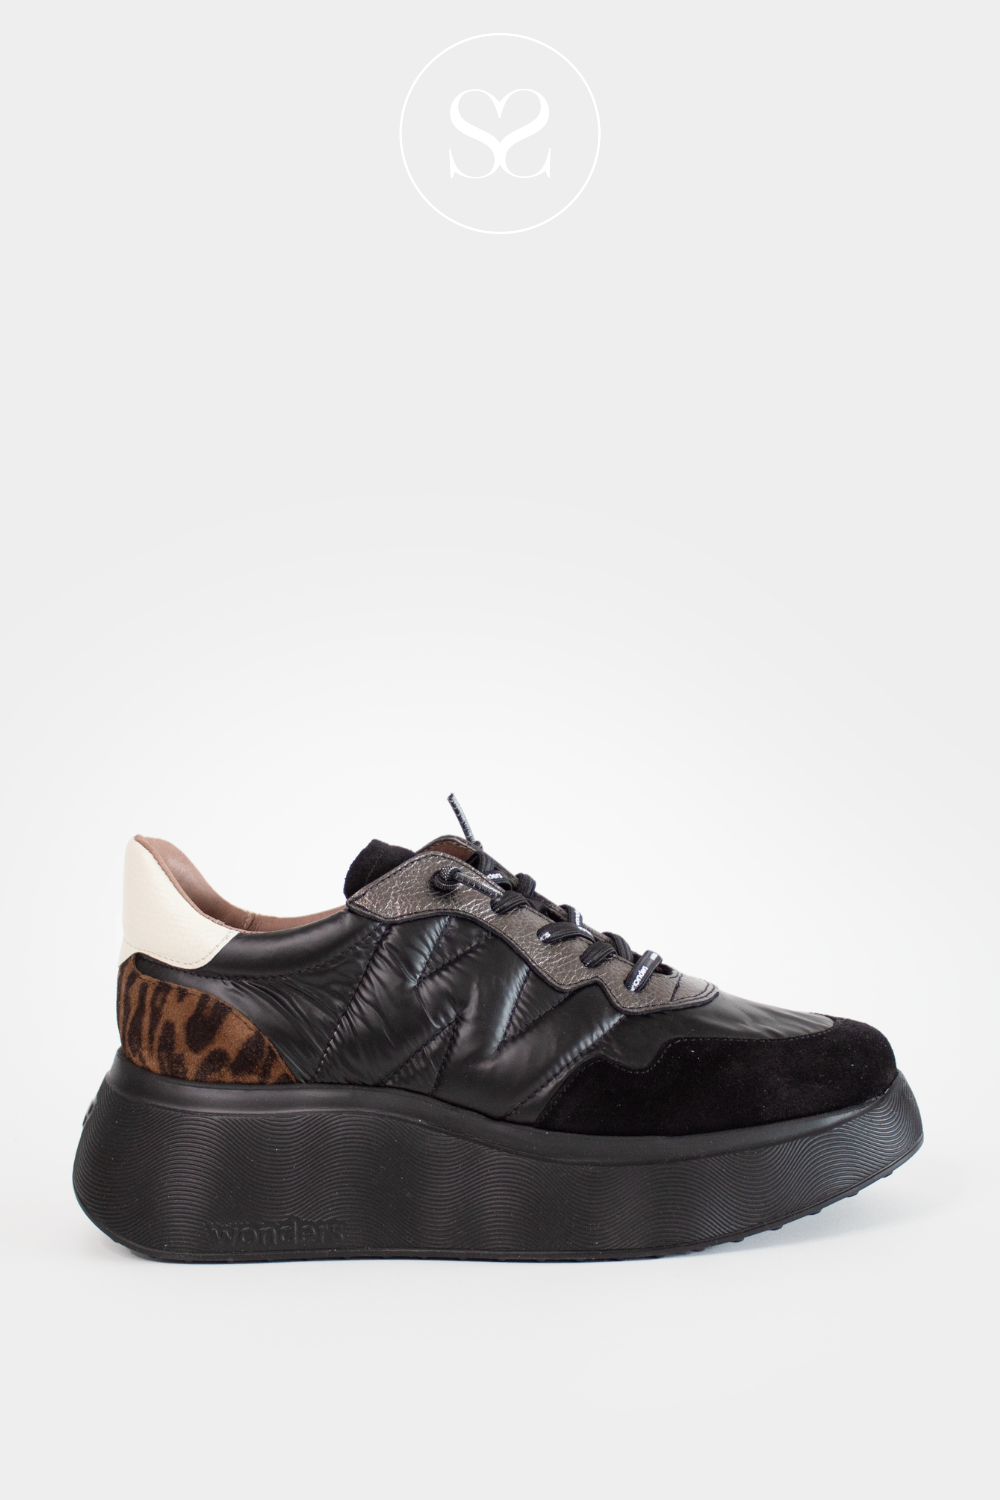 WONDERS A-3610 BLACK & LEOPARD CHUNKY PULL ON TRAINERS